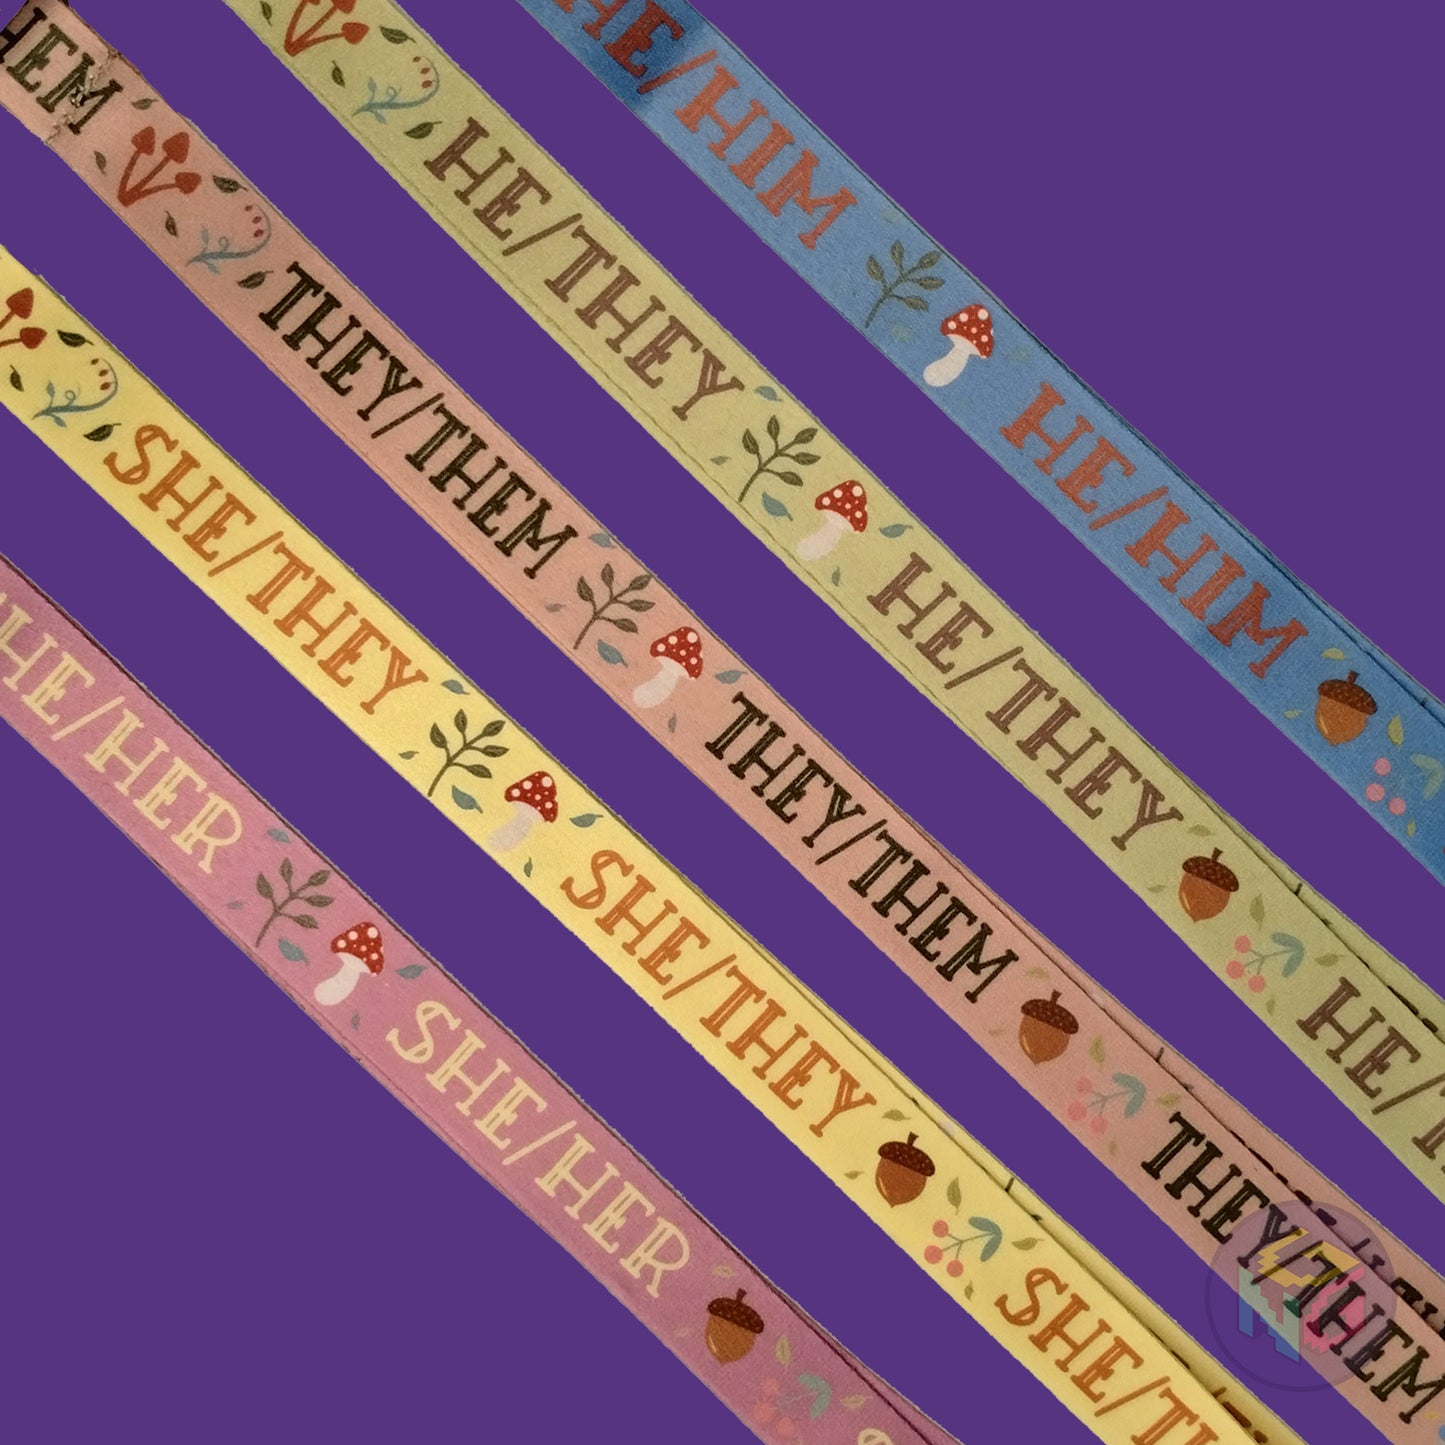 group shot of all five of the cottagecore pronoun lanyards showing the options for he him, he they, they them, she they, and she her